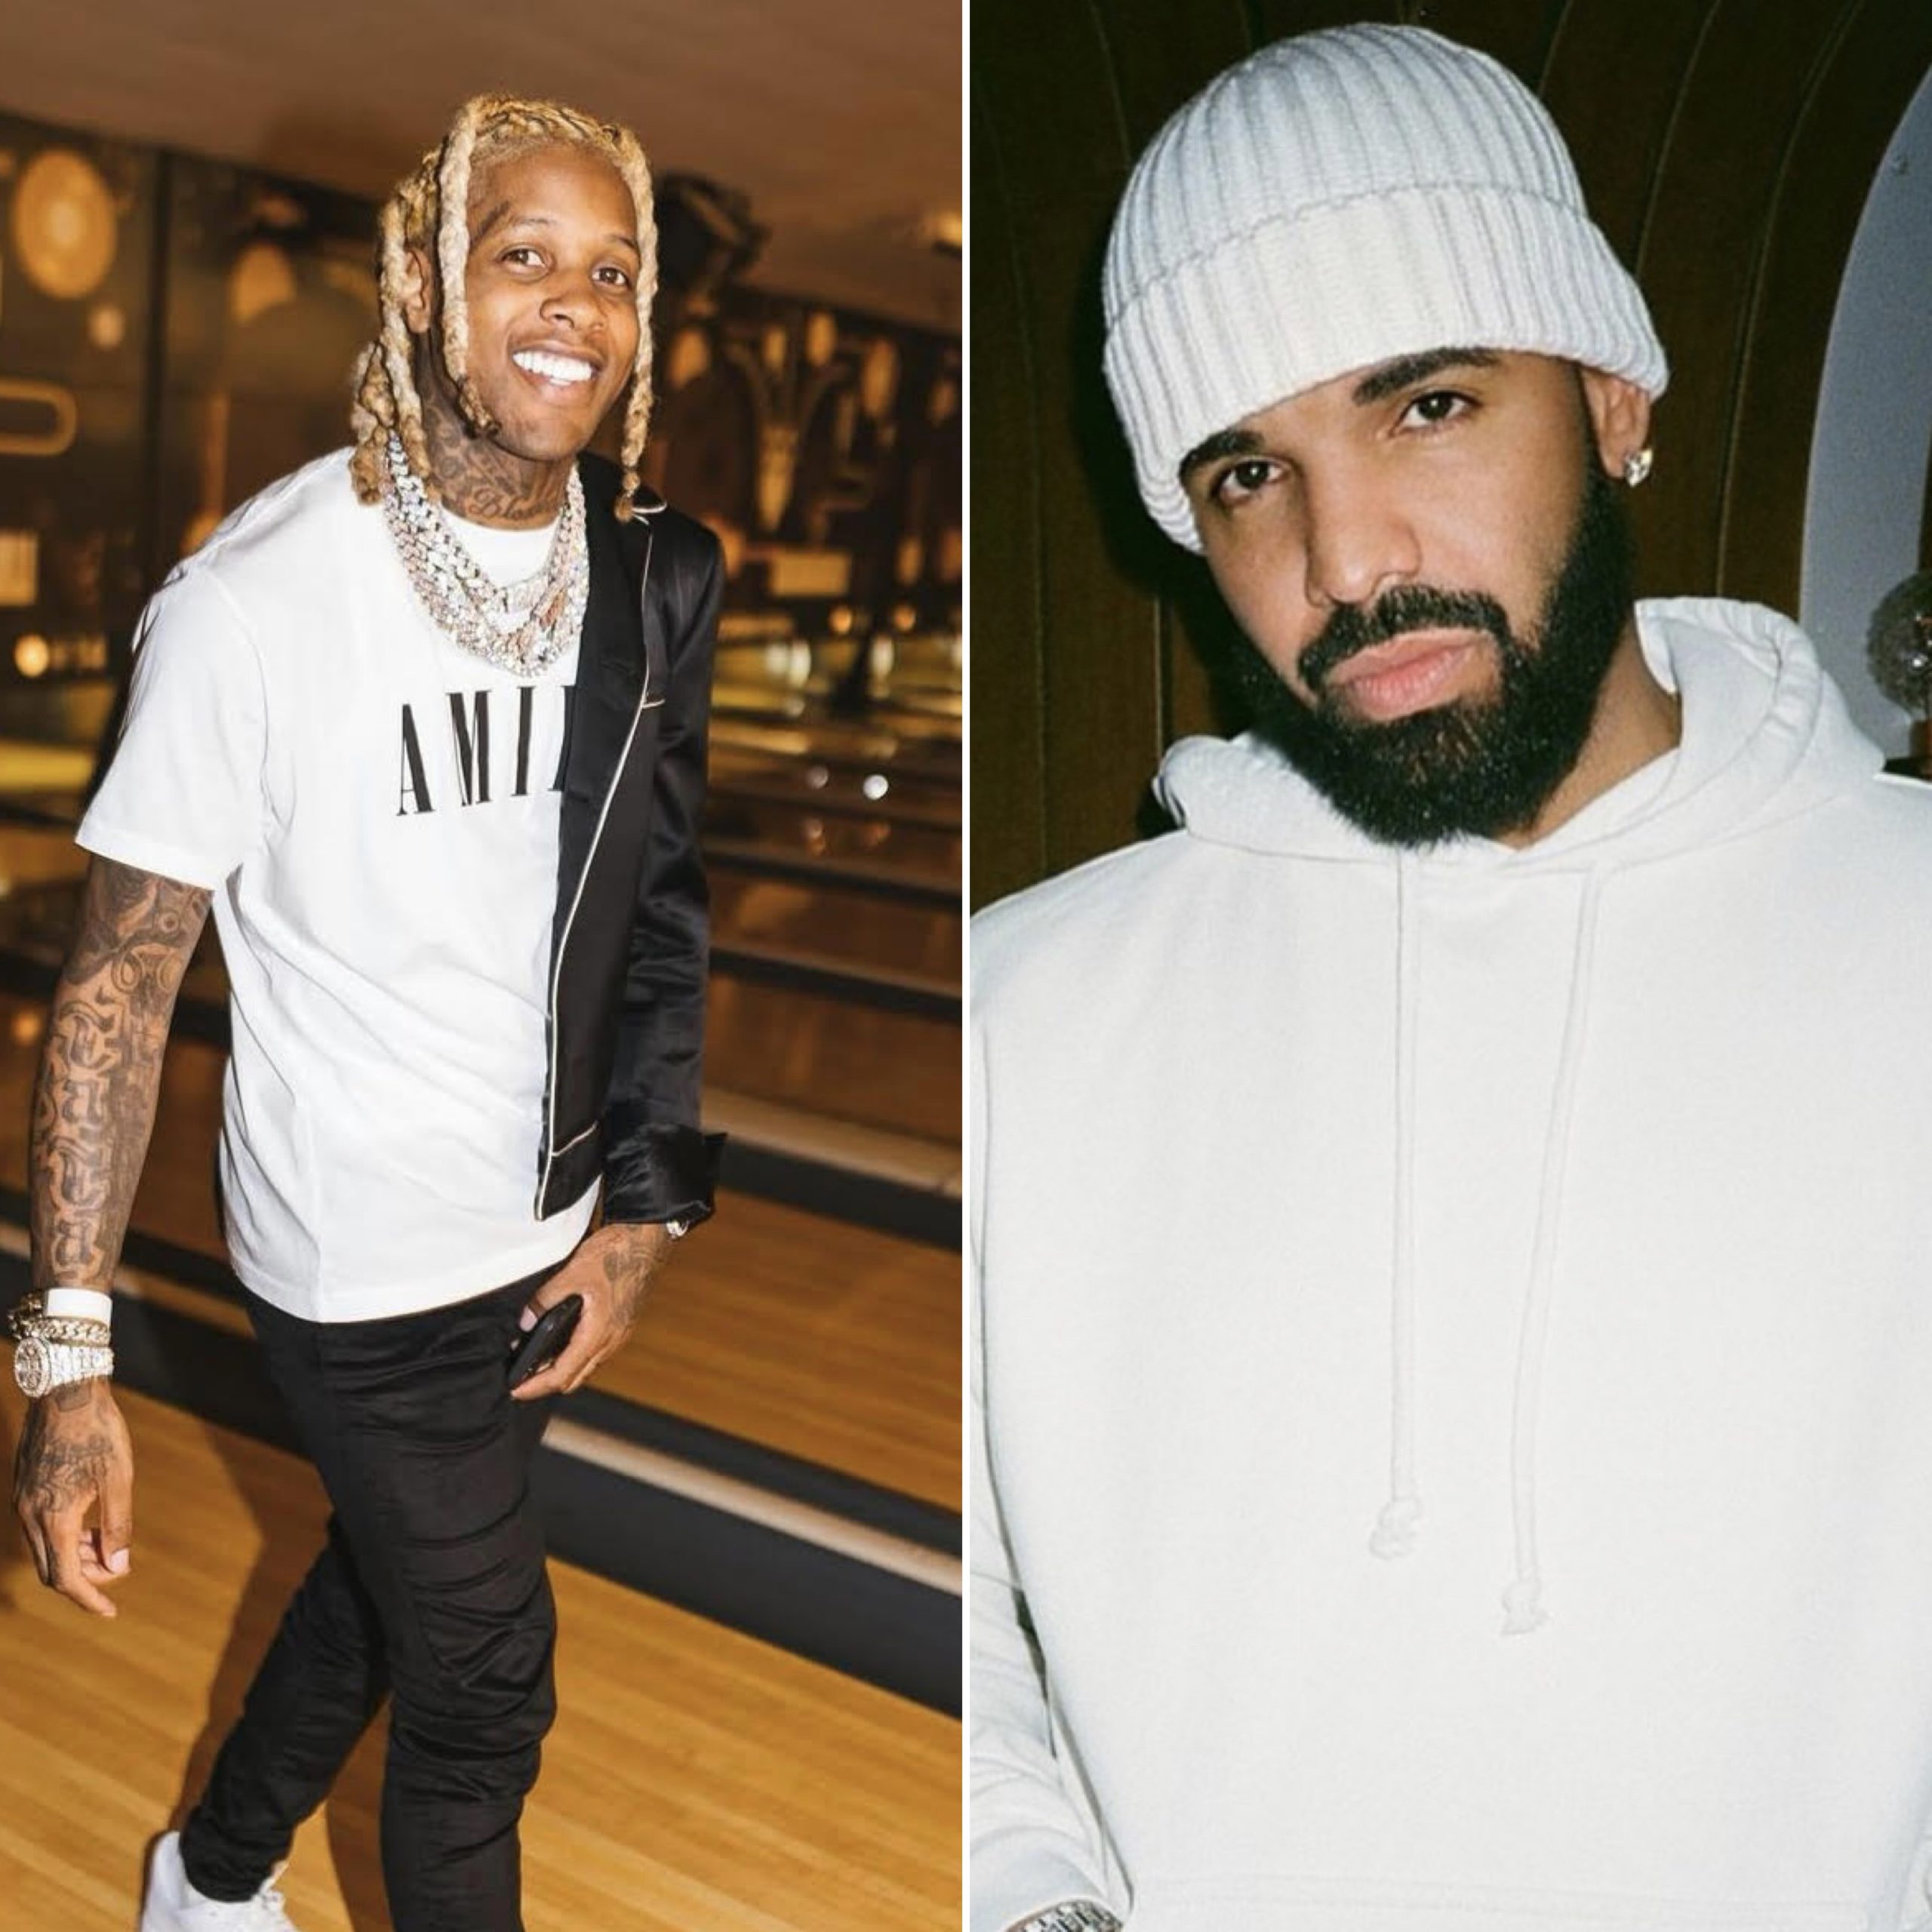 Xvideos Rennirucci - Lil Durk Says After Collaborating With Drake, His Bookings Went From  $40,000 To $100,000: 'Shout Out To Drake, He Definitely Helped a Mother***  Out' - theJasmineBRAND